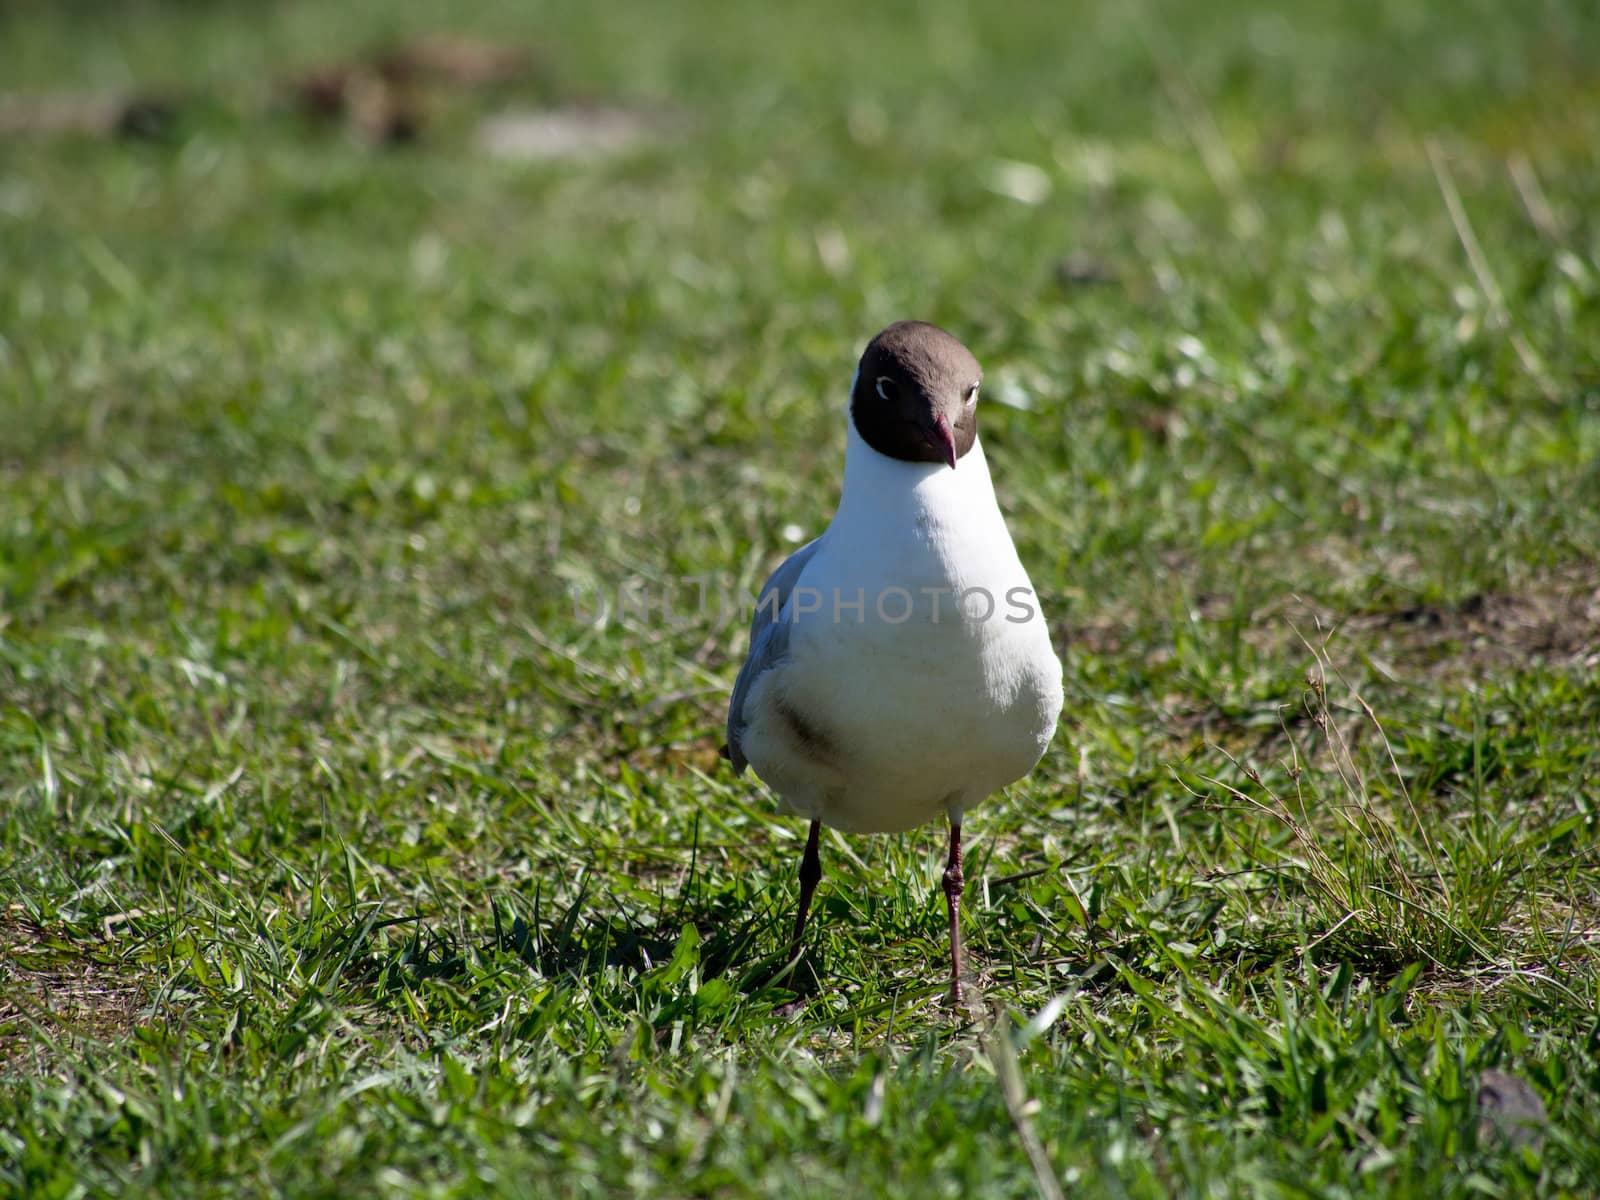 Seagull on the grass by Enskanto